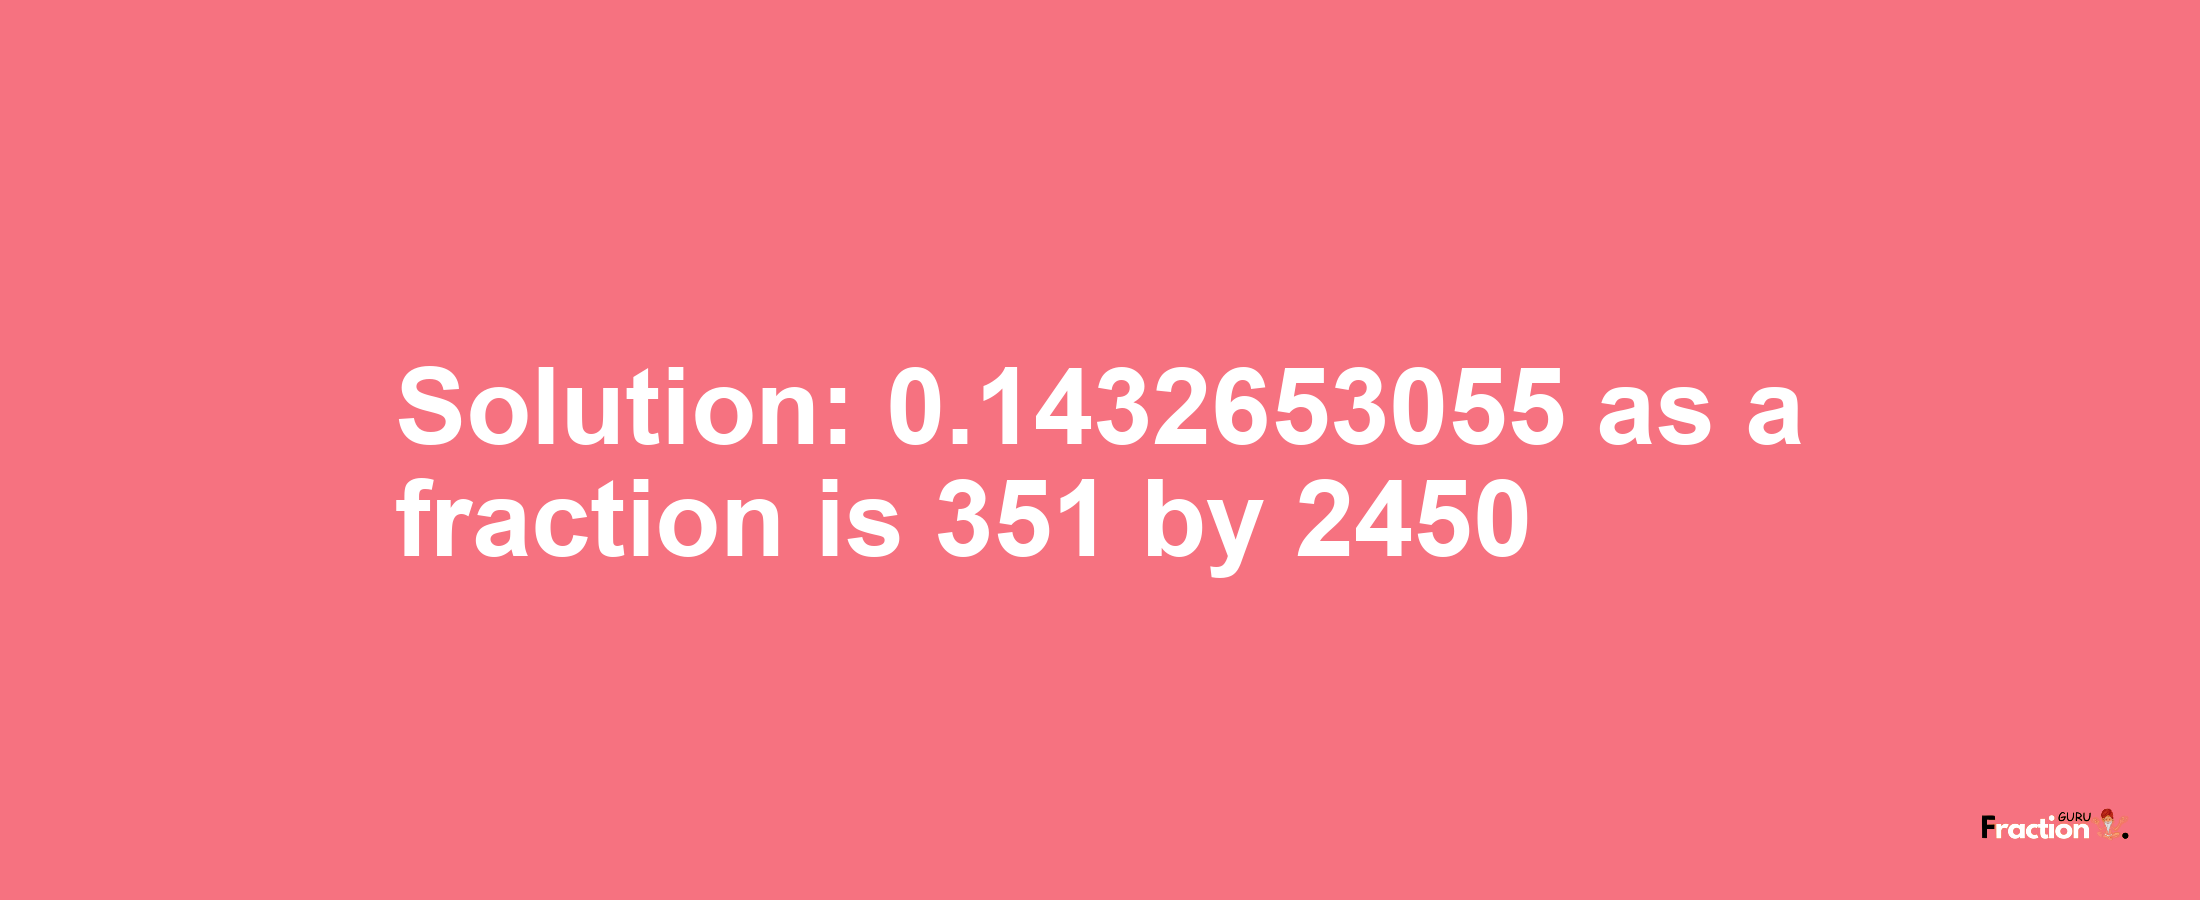 Solution:0.1432653055 as a fraction is 351/2450